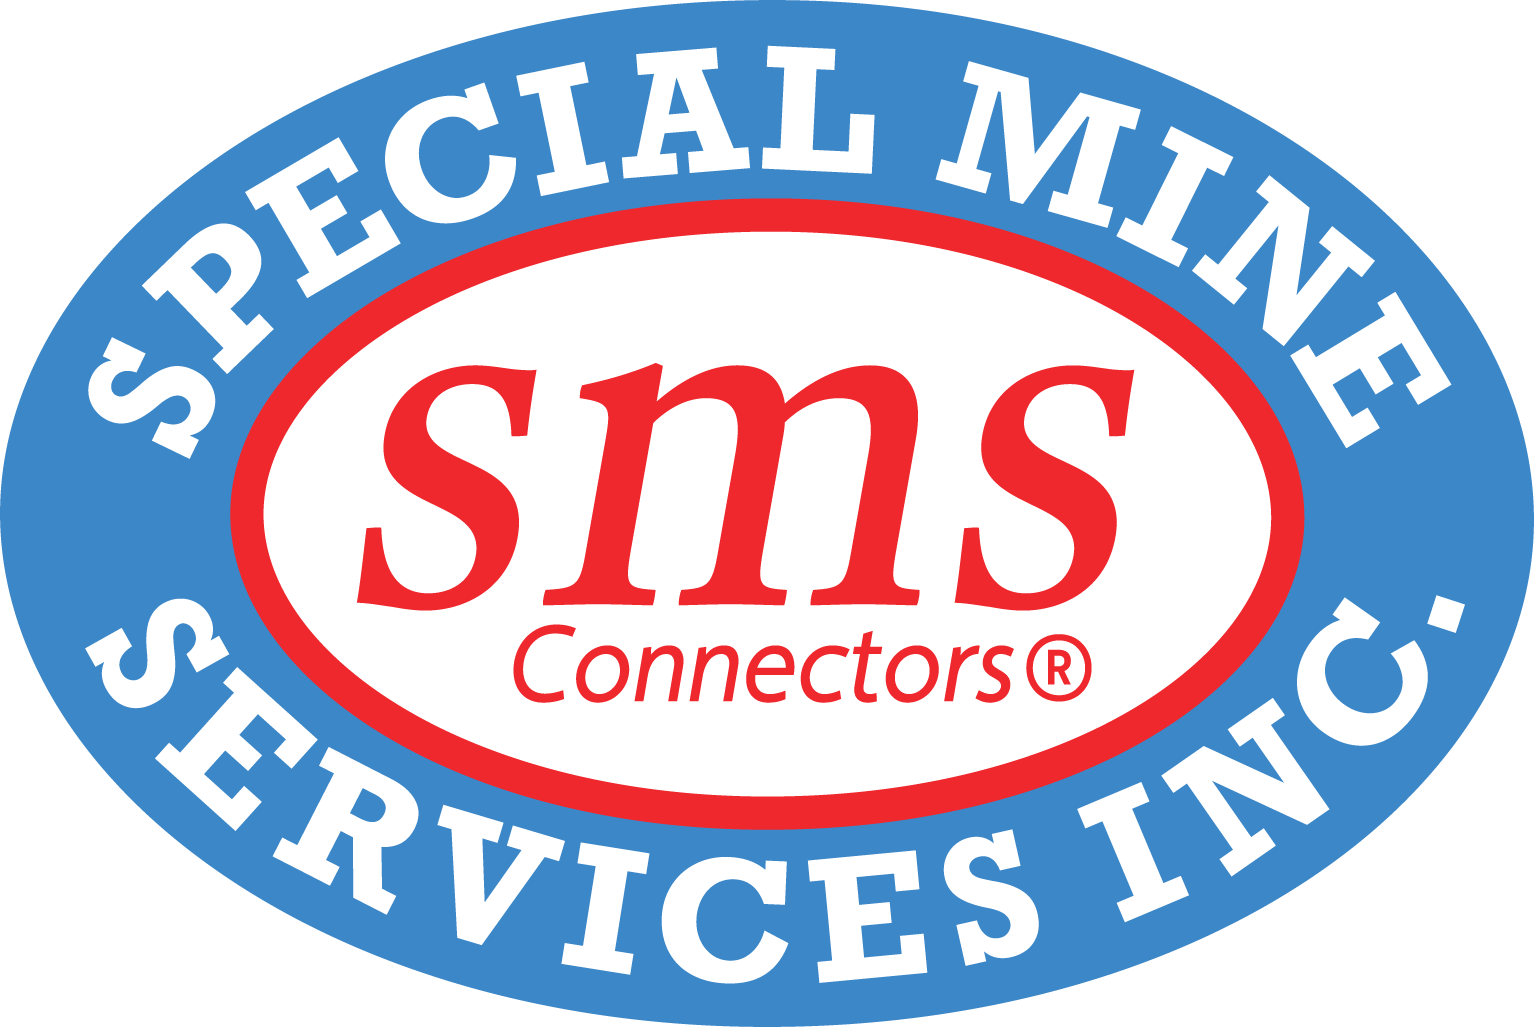 Special Mine Services, Inc. - SMS Connectors®